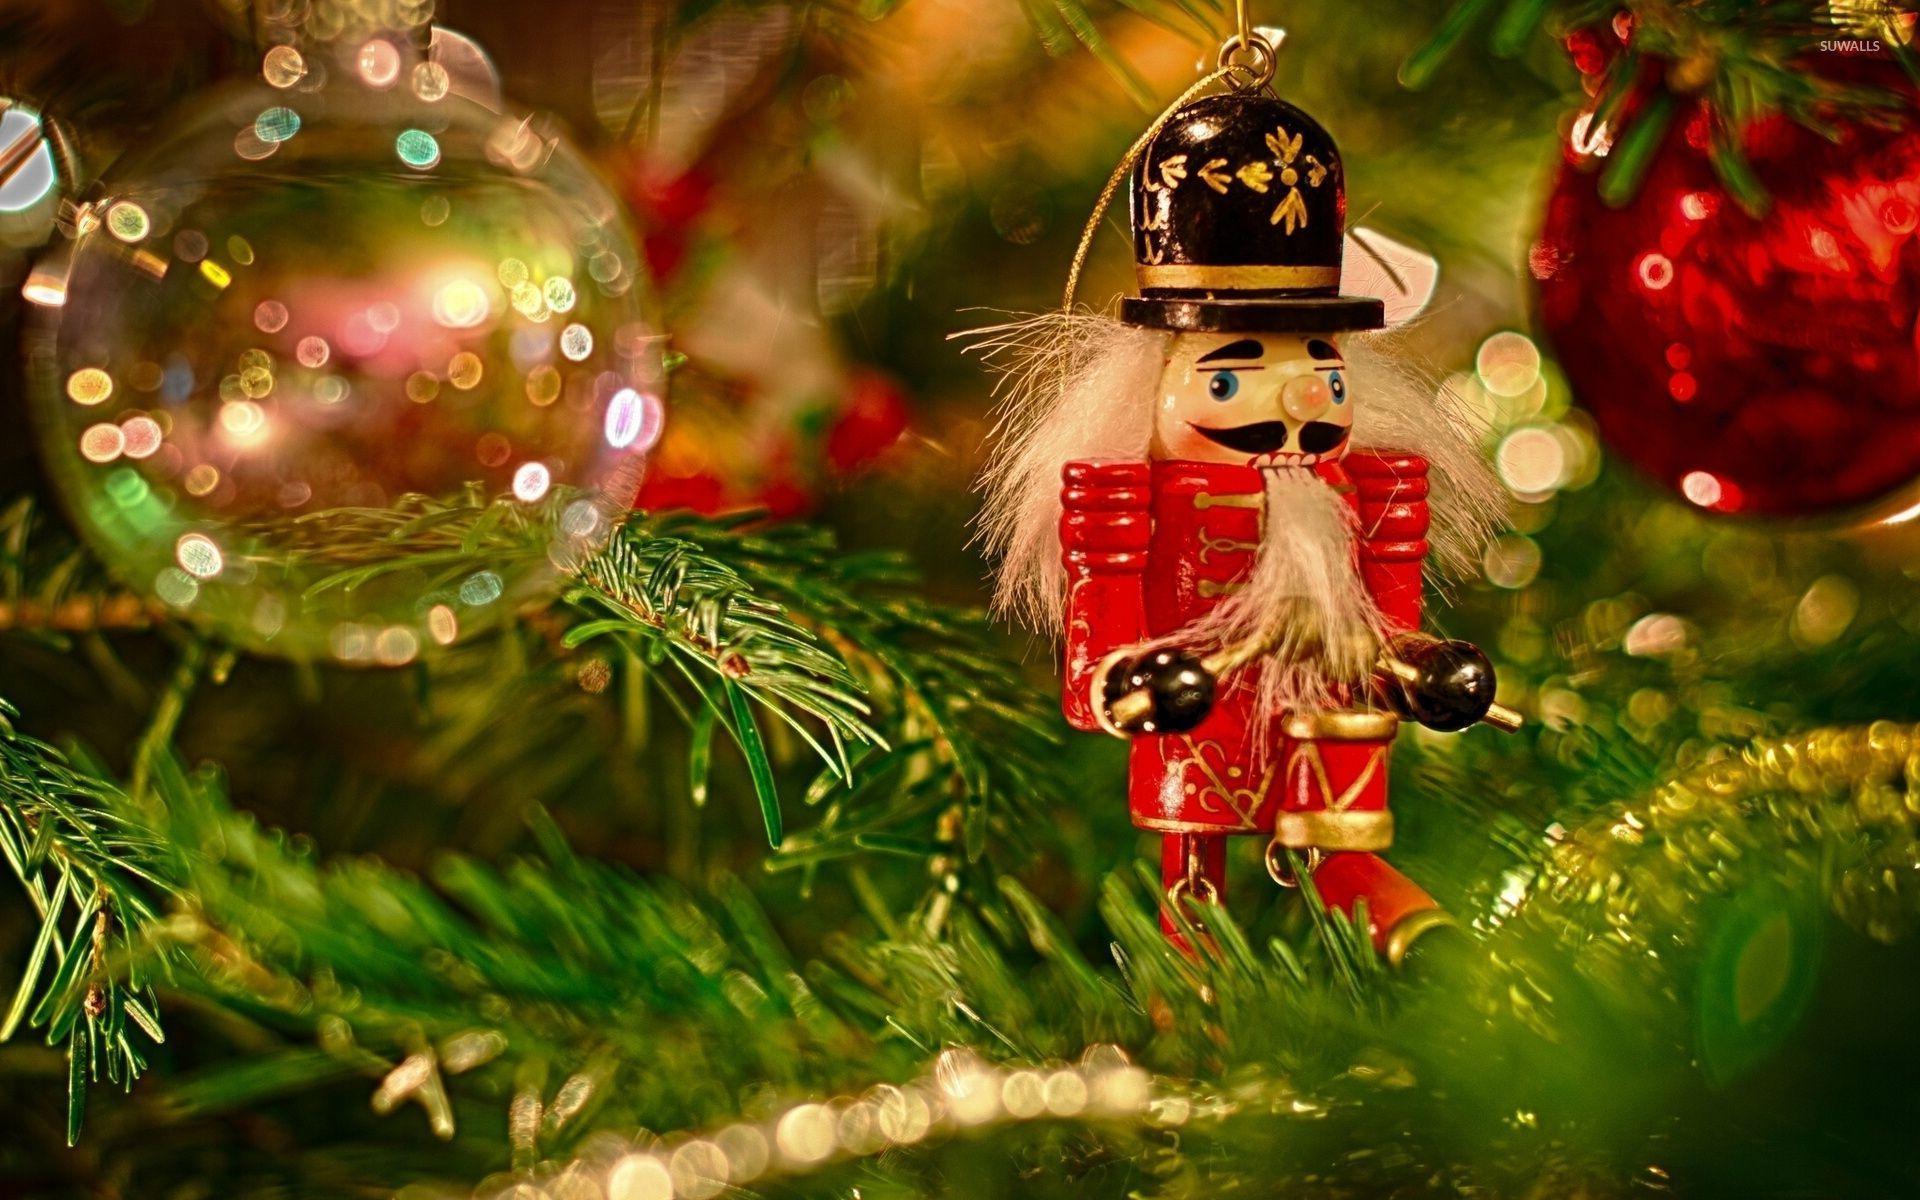 Wooden soldier in the Christmas tree wallpaper wallpaper